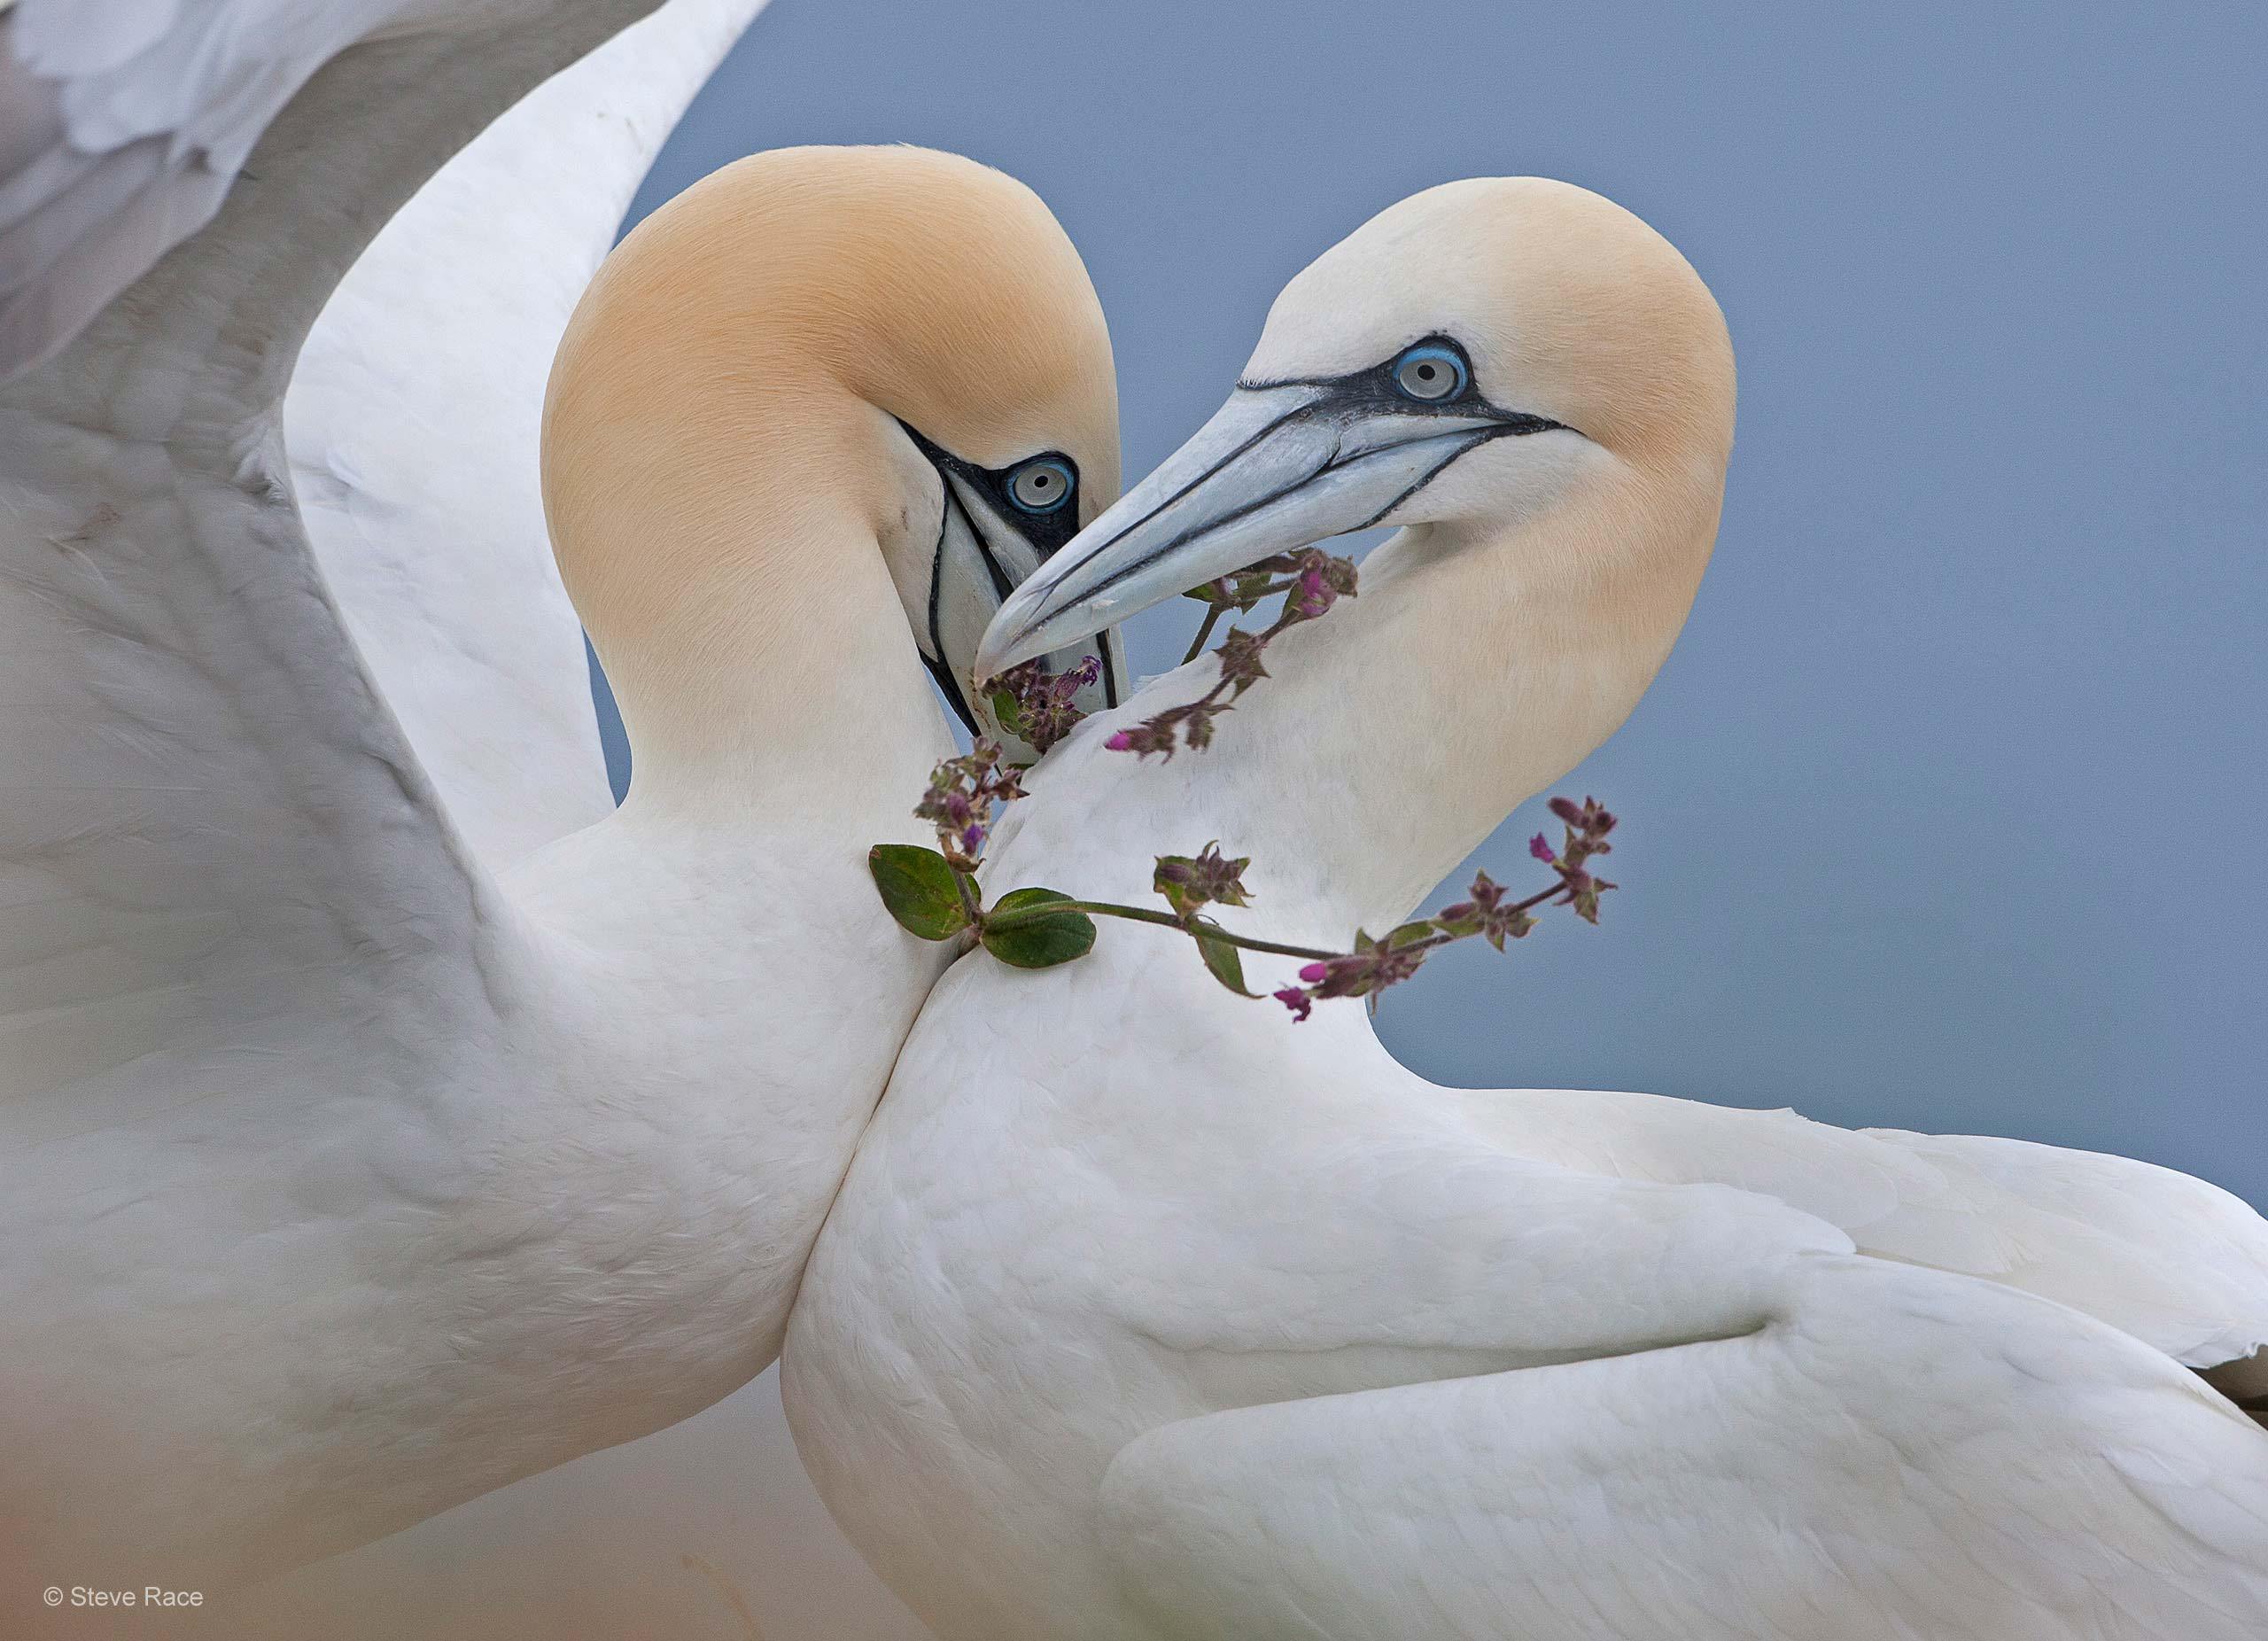 English gannets give each other flowers | Dear Kitty. Some blog